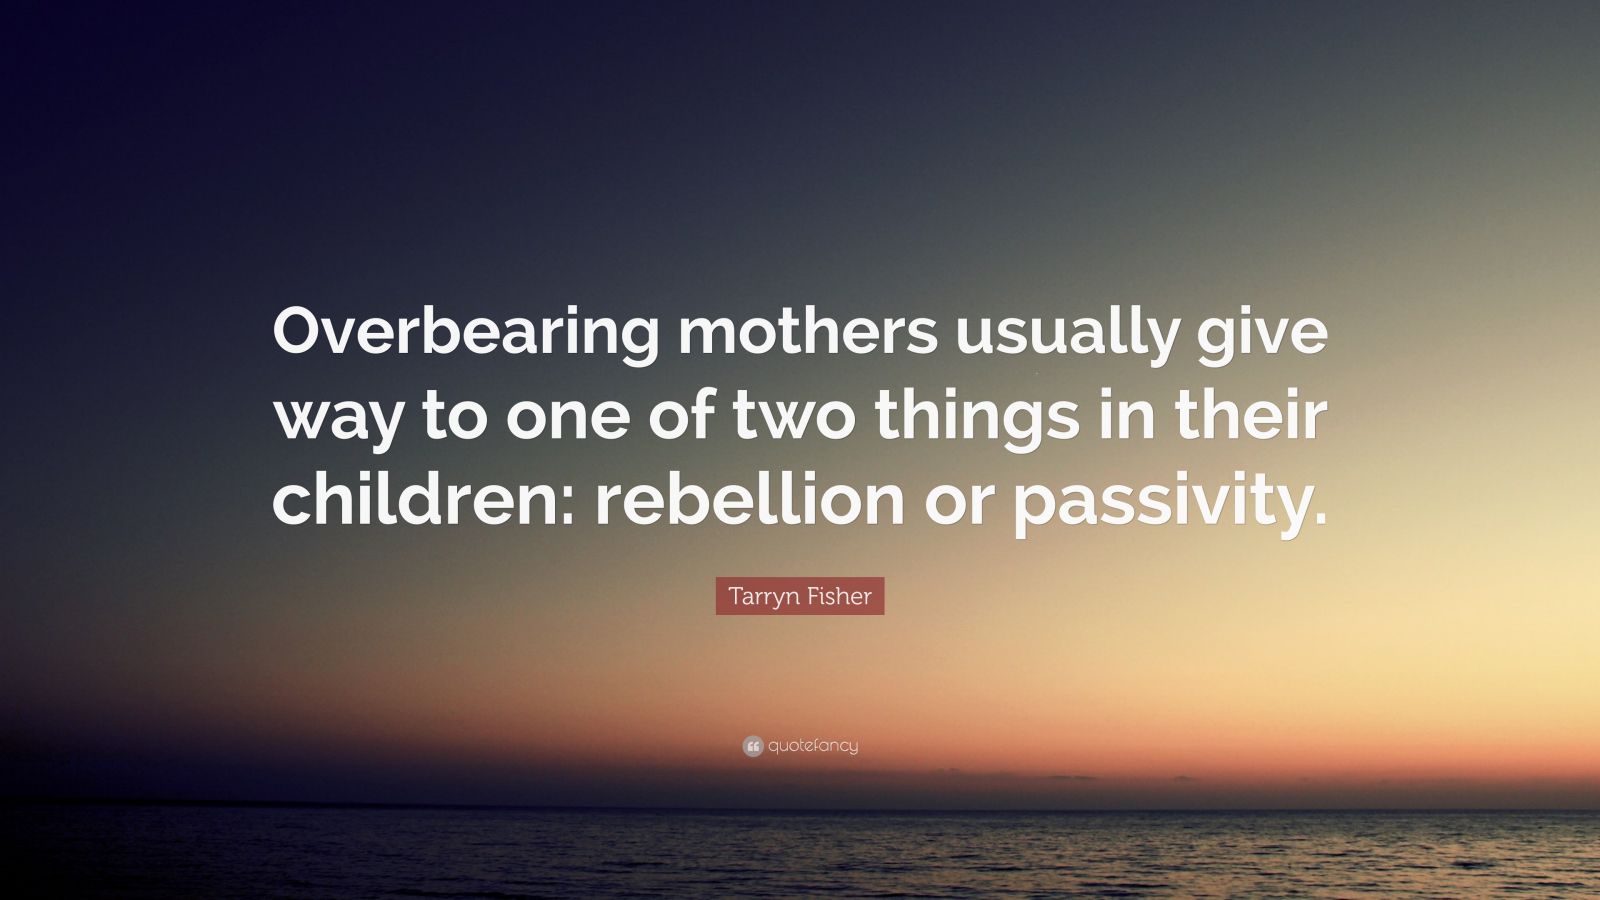 Tarryn Fisher Quote: “Overbearing mothers usually give way to one of ...